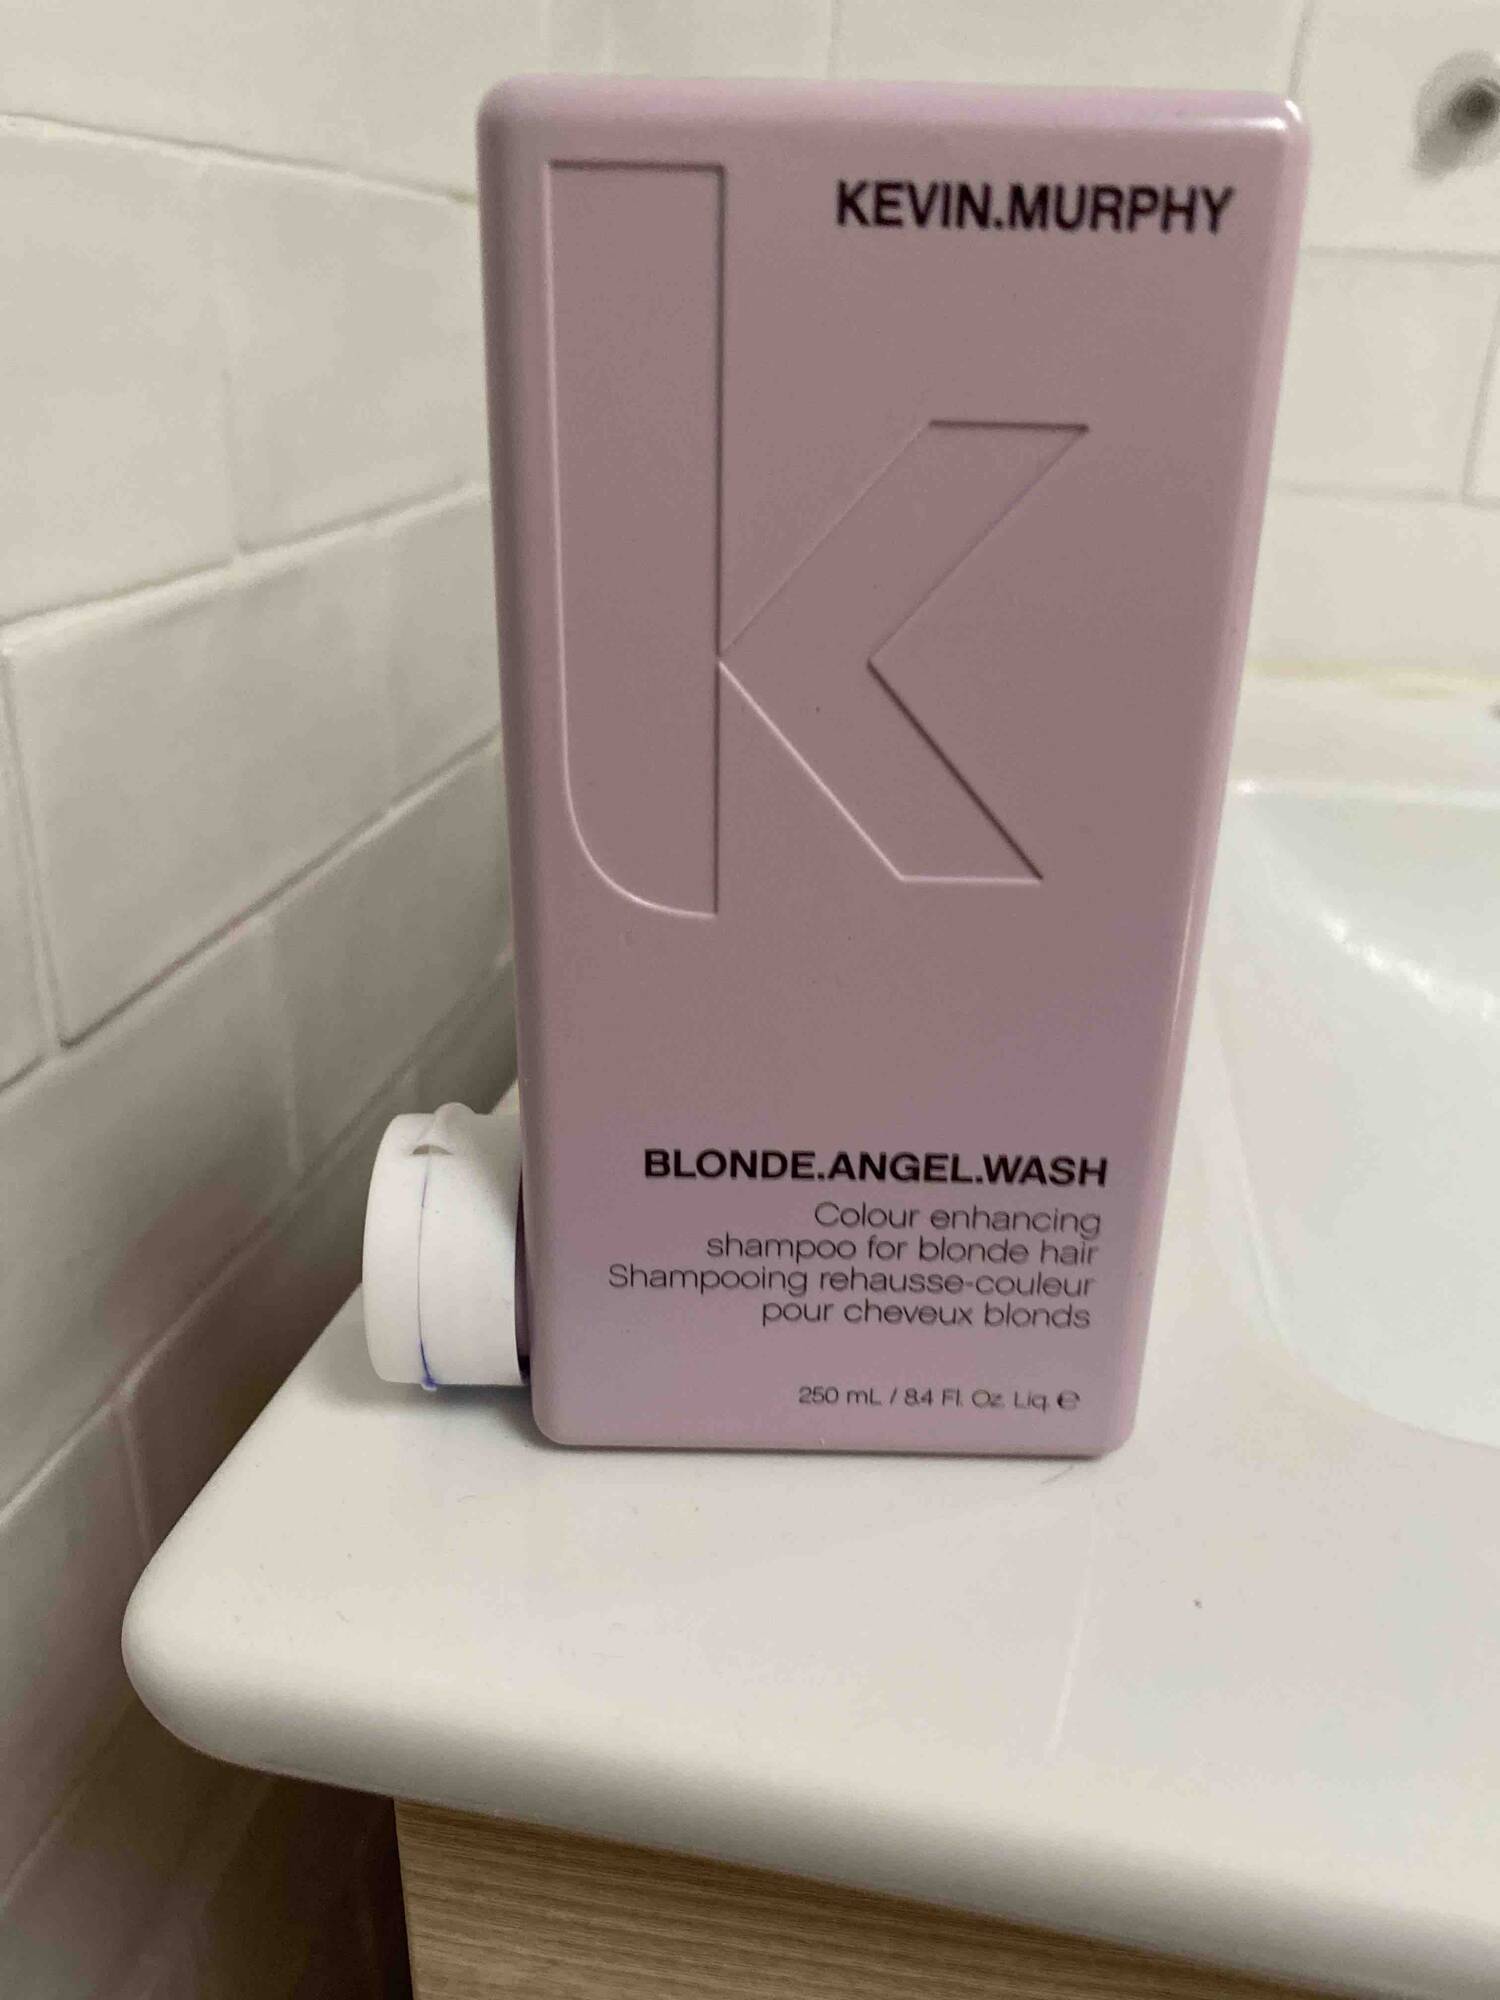 KEVIN MURPHY - Blonde angel wash - Shampooing rehausse-couleur 